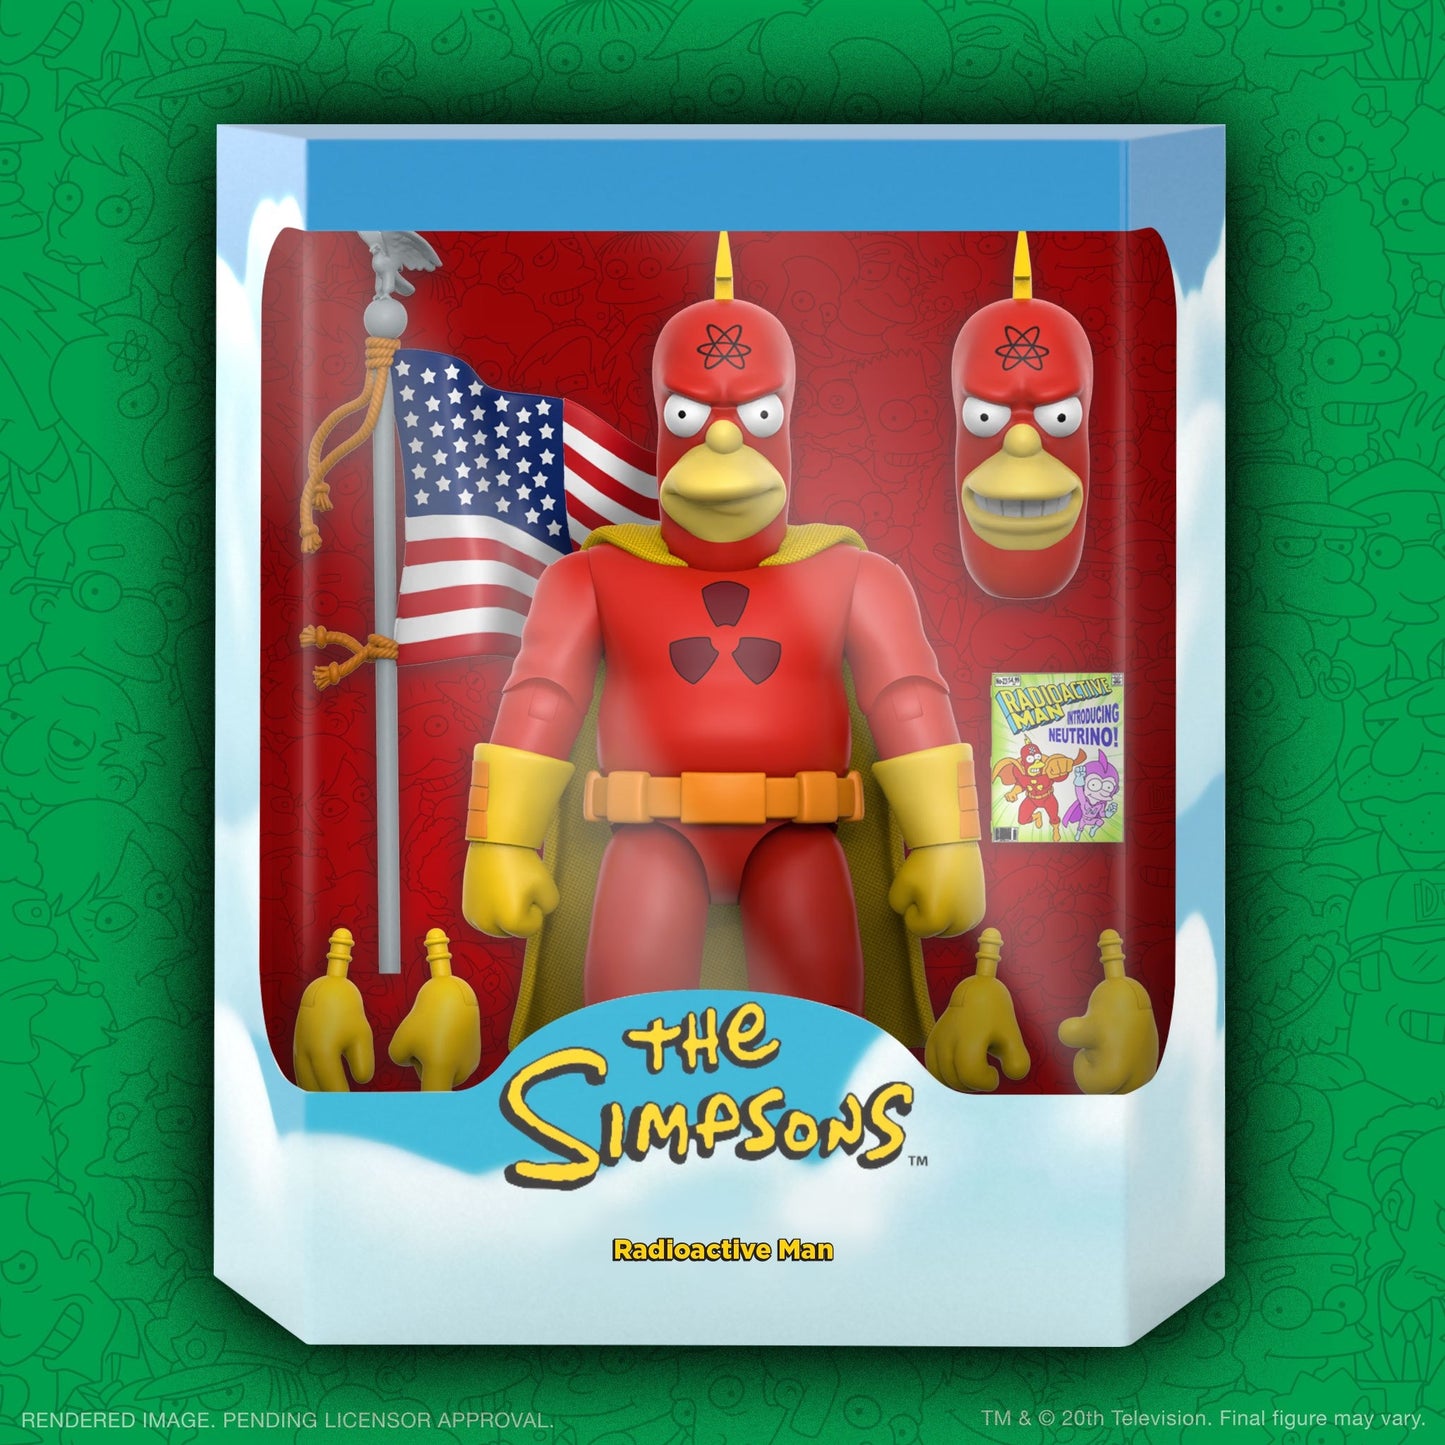 ULTIMATES THE SIMPSONS WAVE 4 RADIOACTIVE MAN